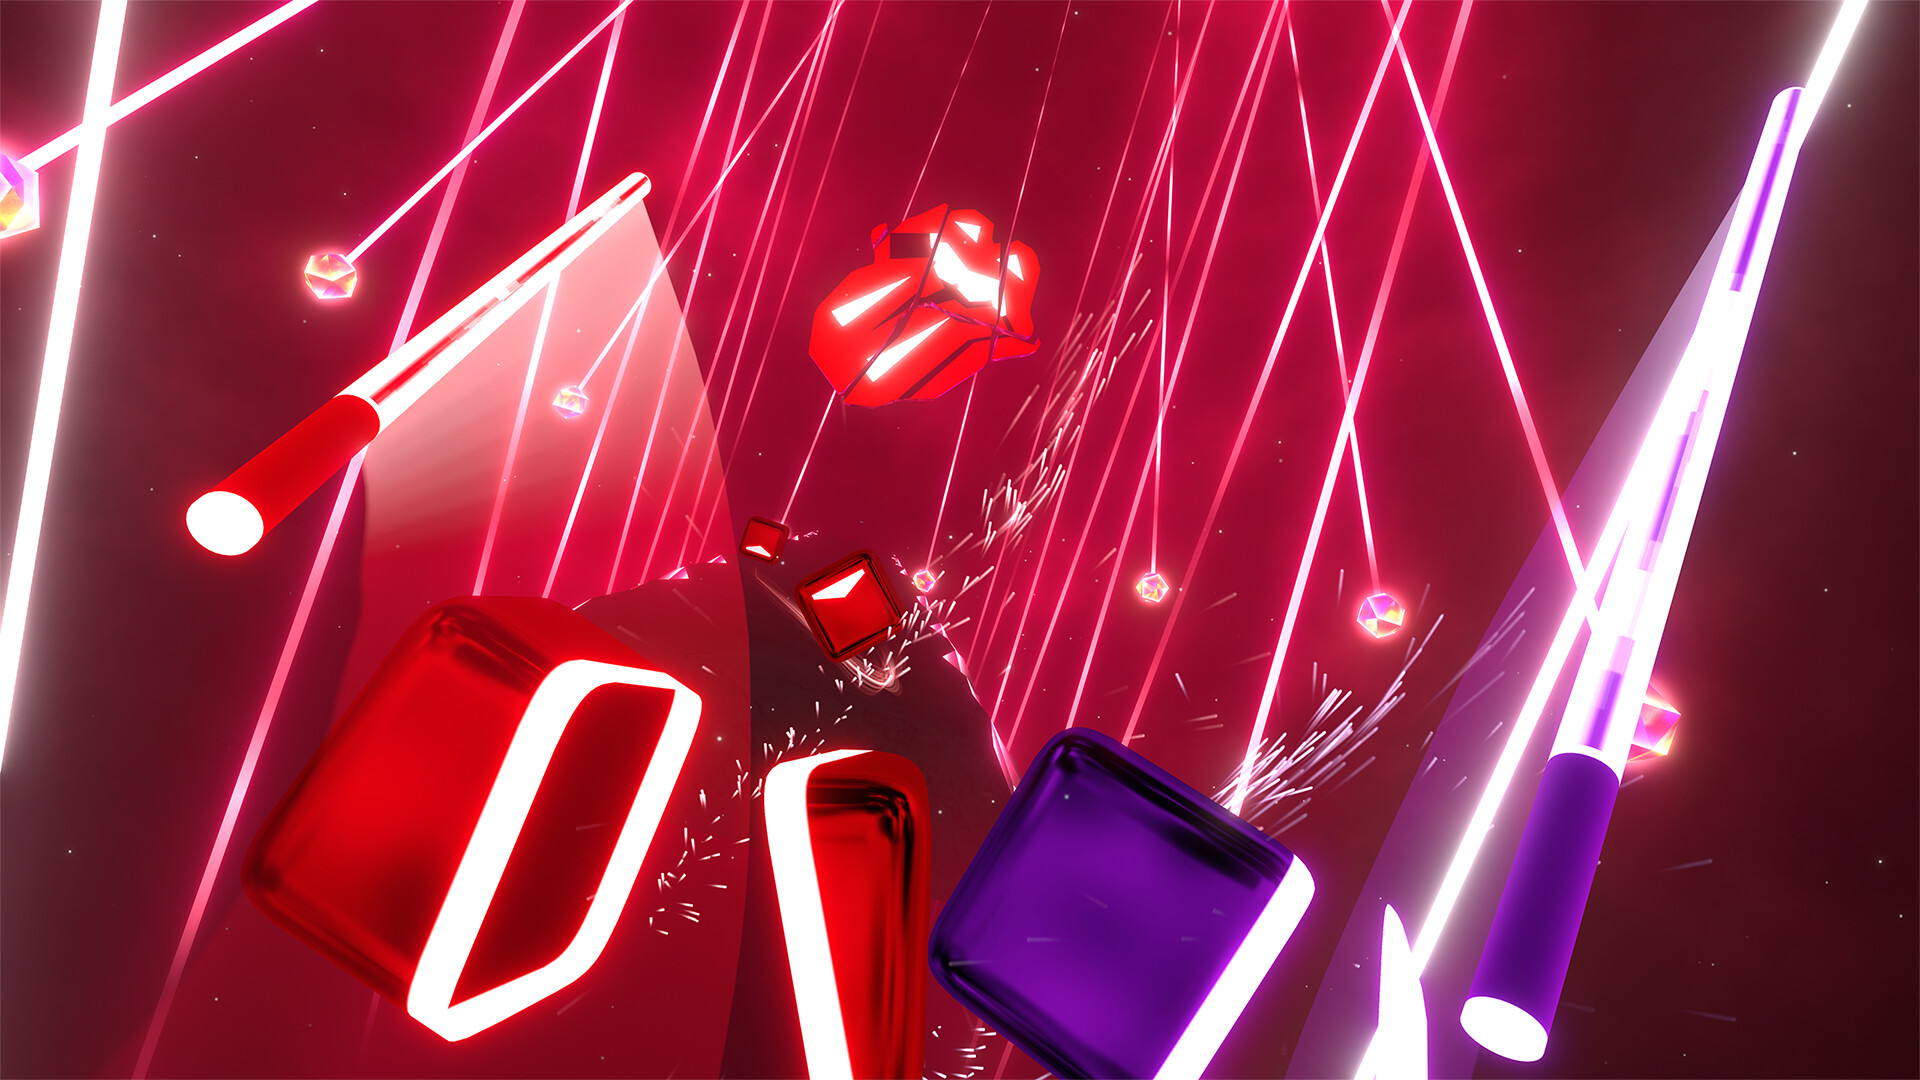 Beat Saber - The Rolling Stones - "Start Me Up" Featured Screenshot #1